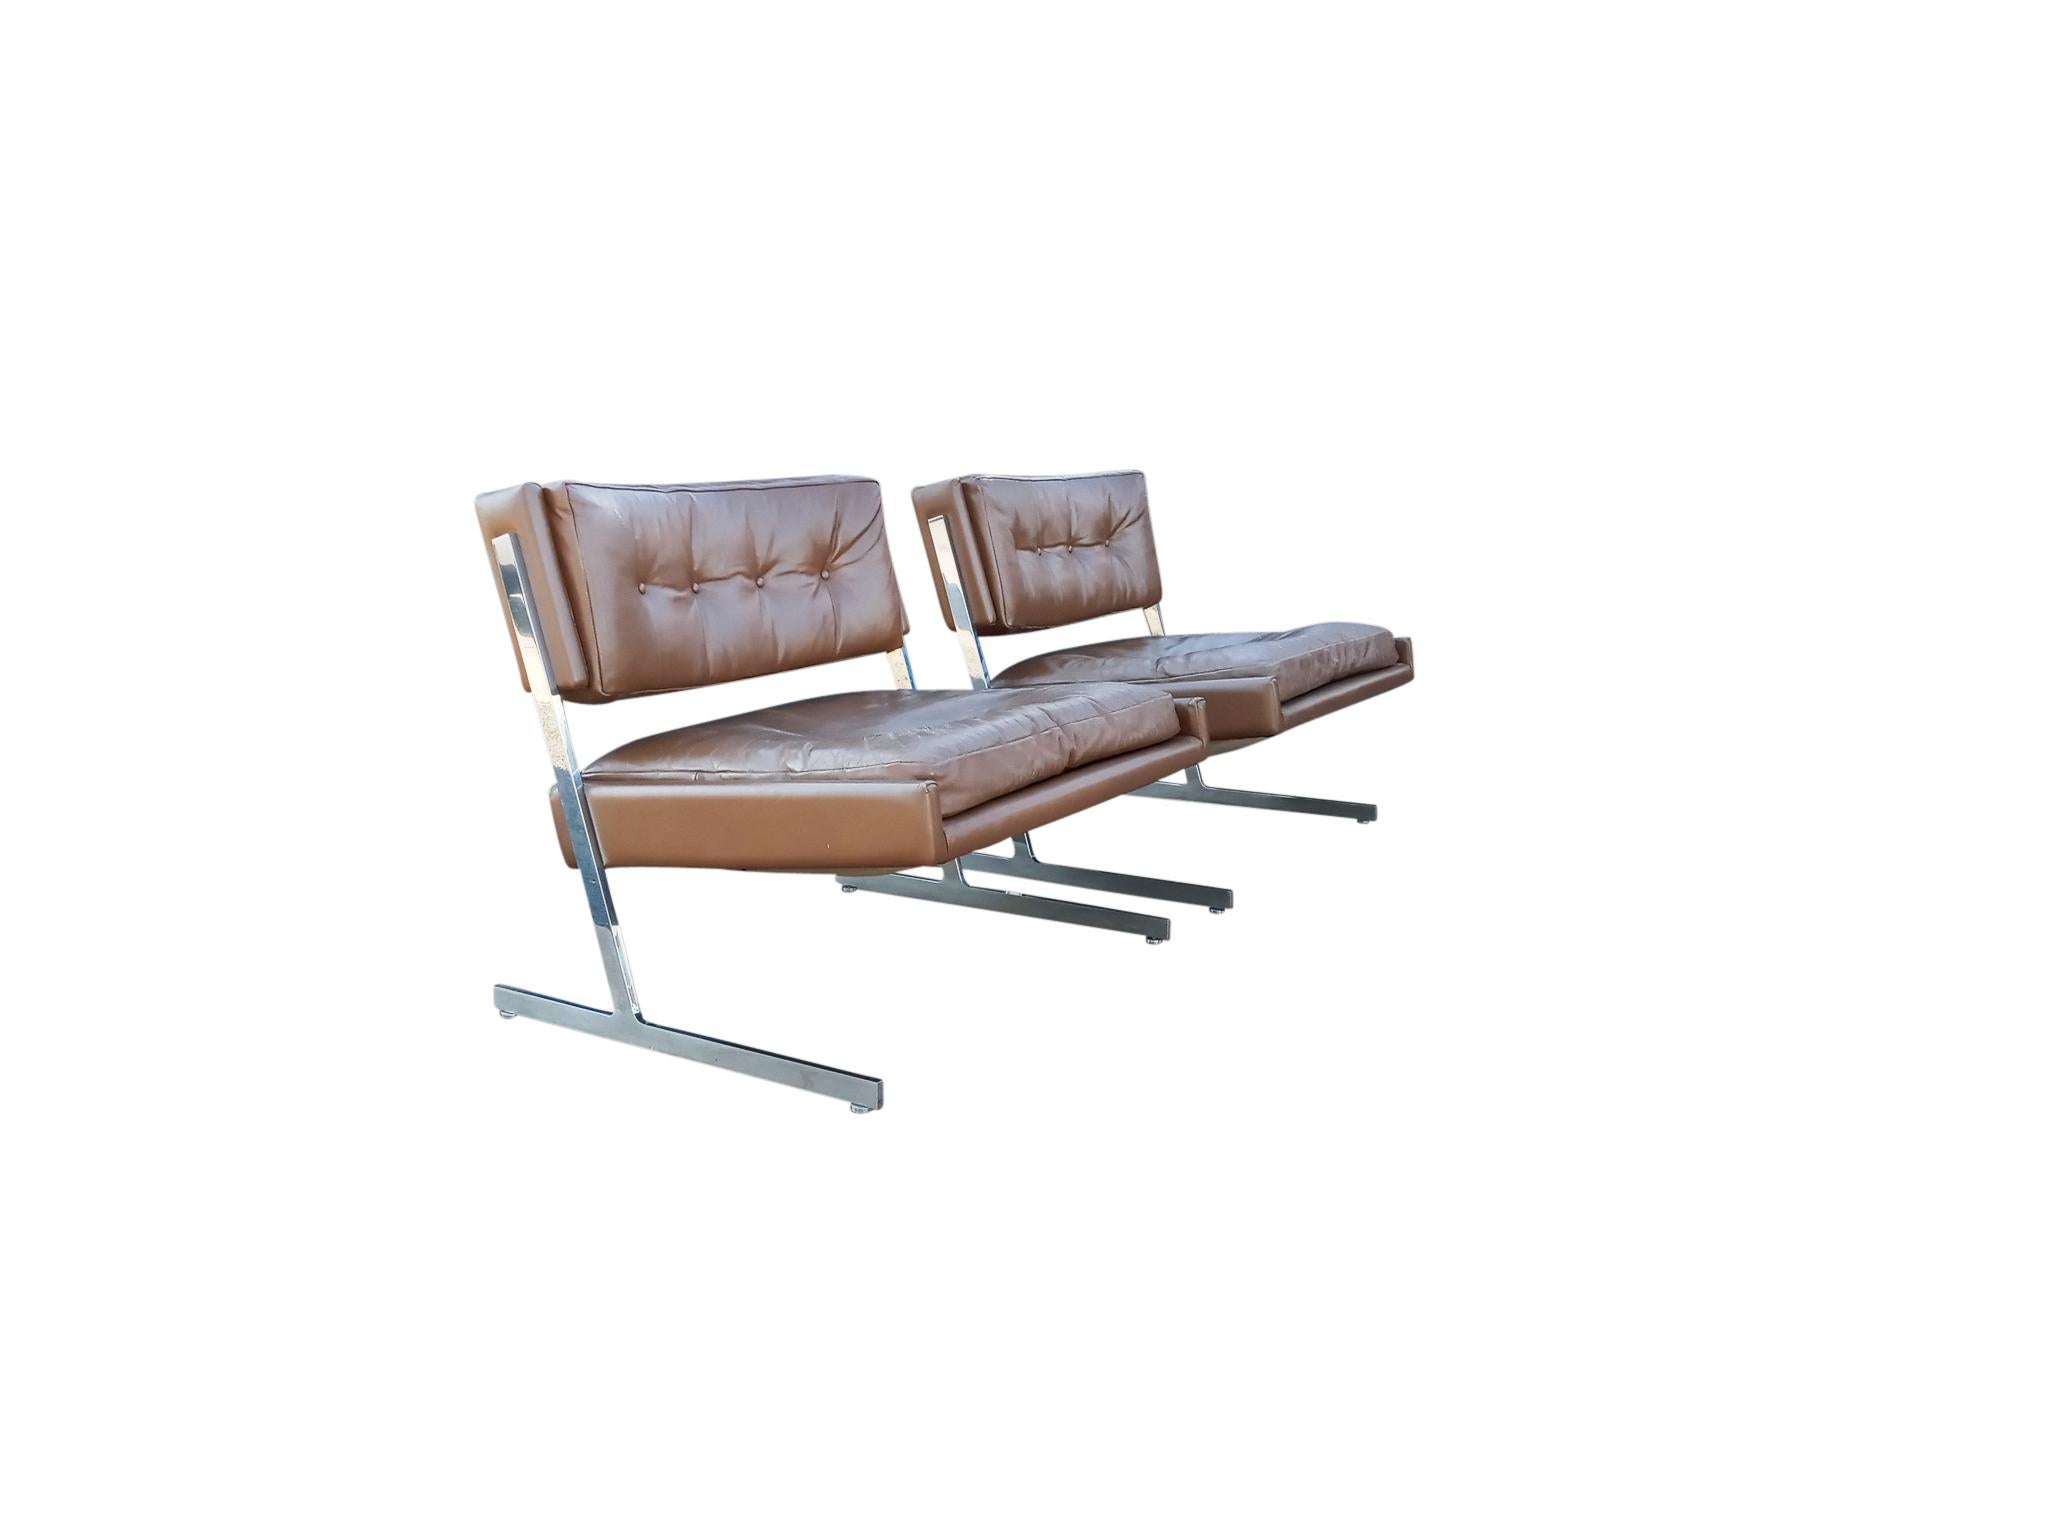 This elegant pair of Probber lounge chairs has a dynamic profile acheived by the use of a cantalievered seat supported by polished stainless steel frames. The origina chocolate-brown leather is button tufted. And the stainless steel frames have a